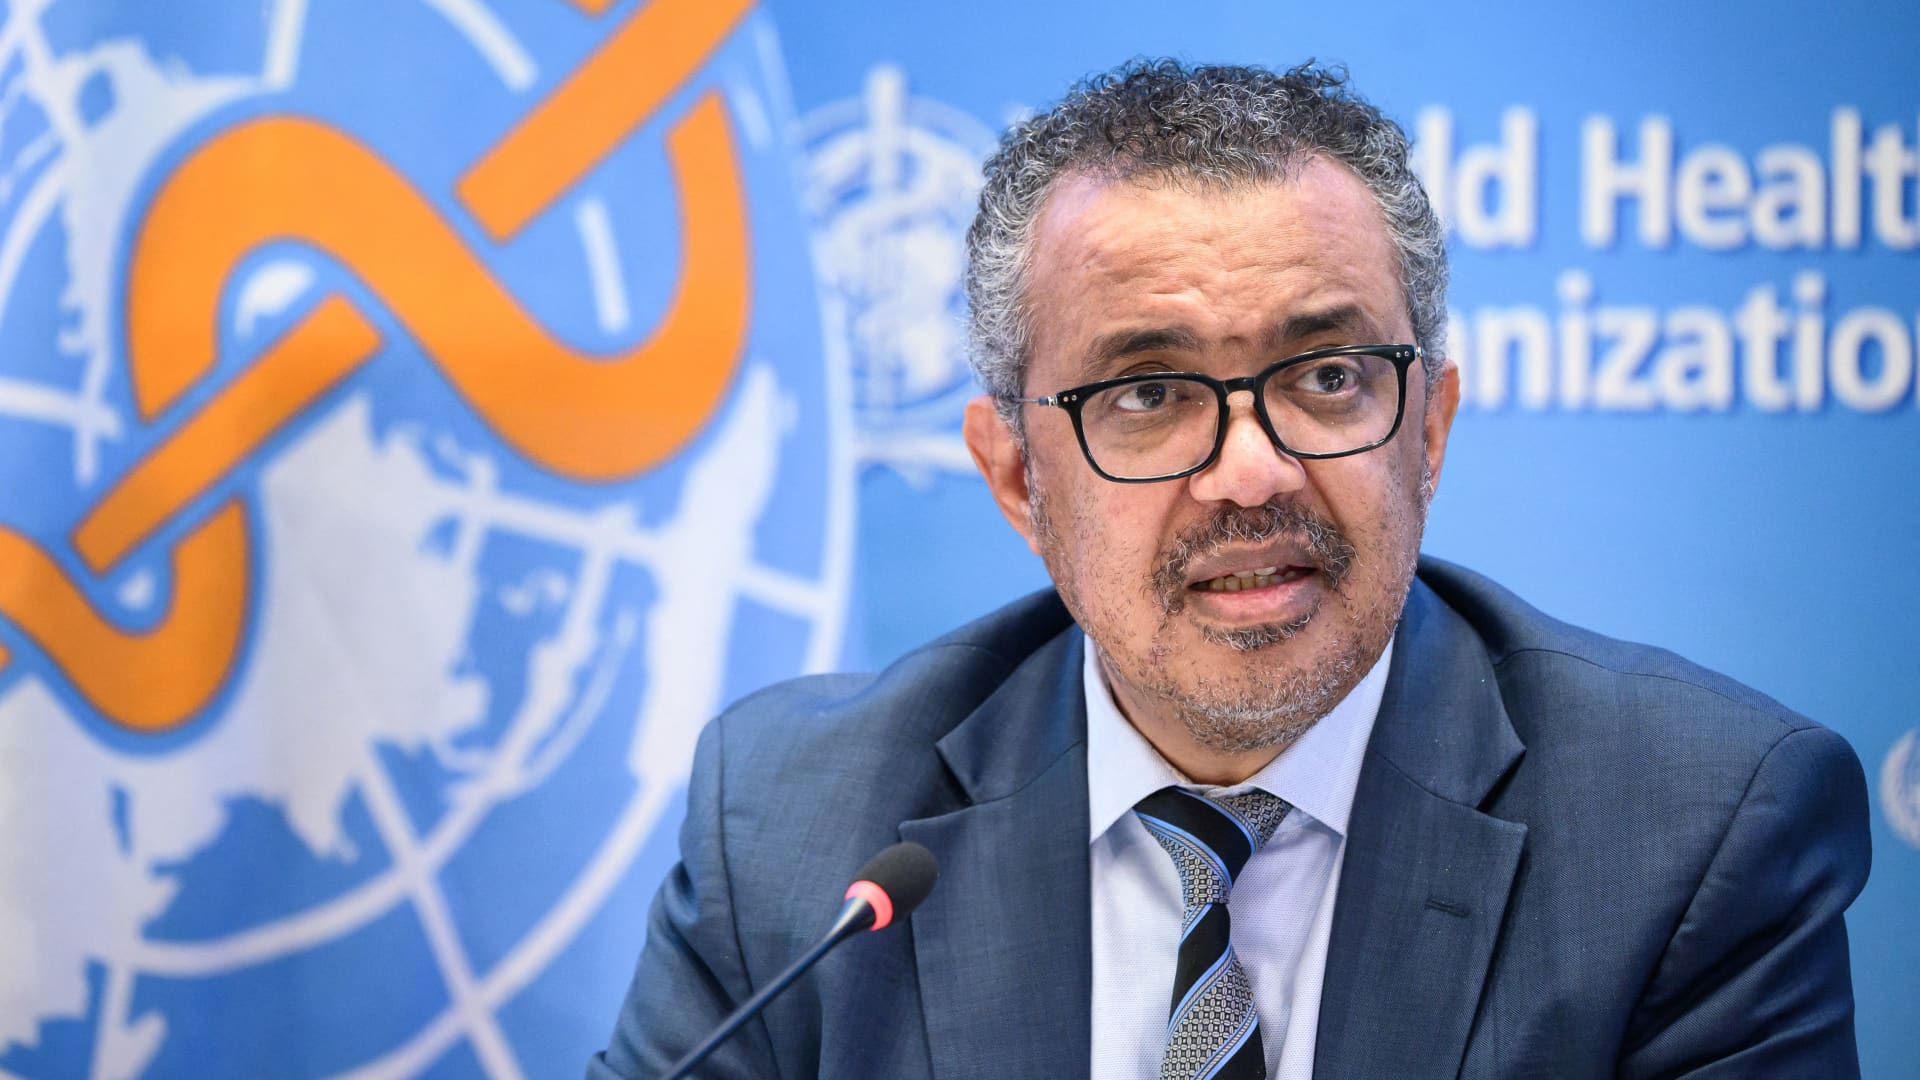 WHO Director-General Tedros Adhanom Ghebreyesus speaks during a press conference on December 20, 2021 at the WHO headquarters in Geneva